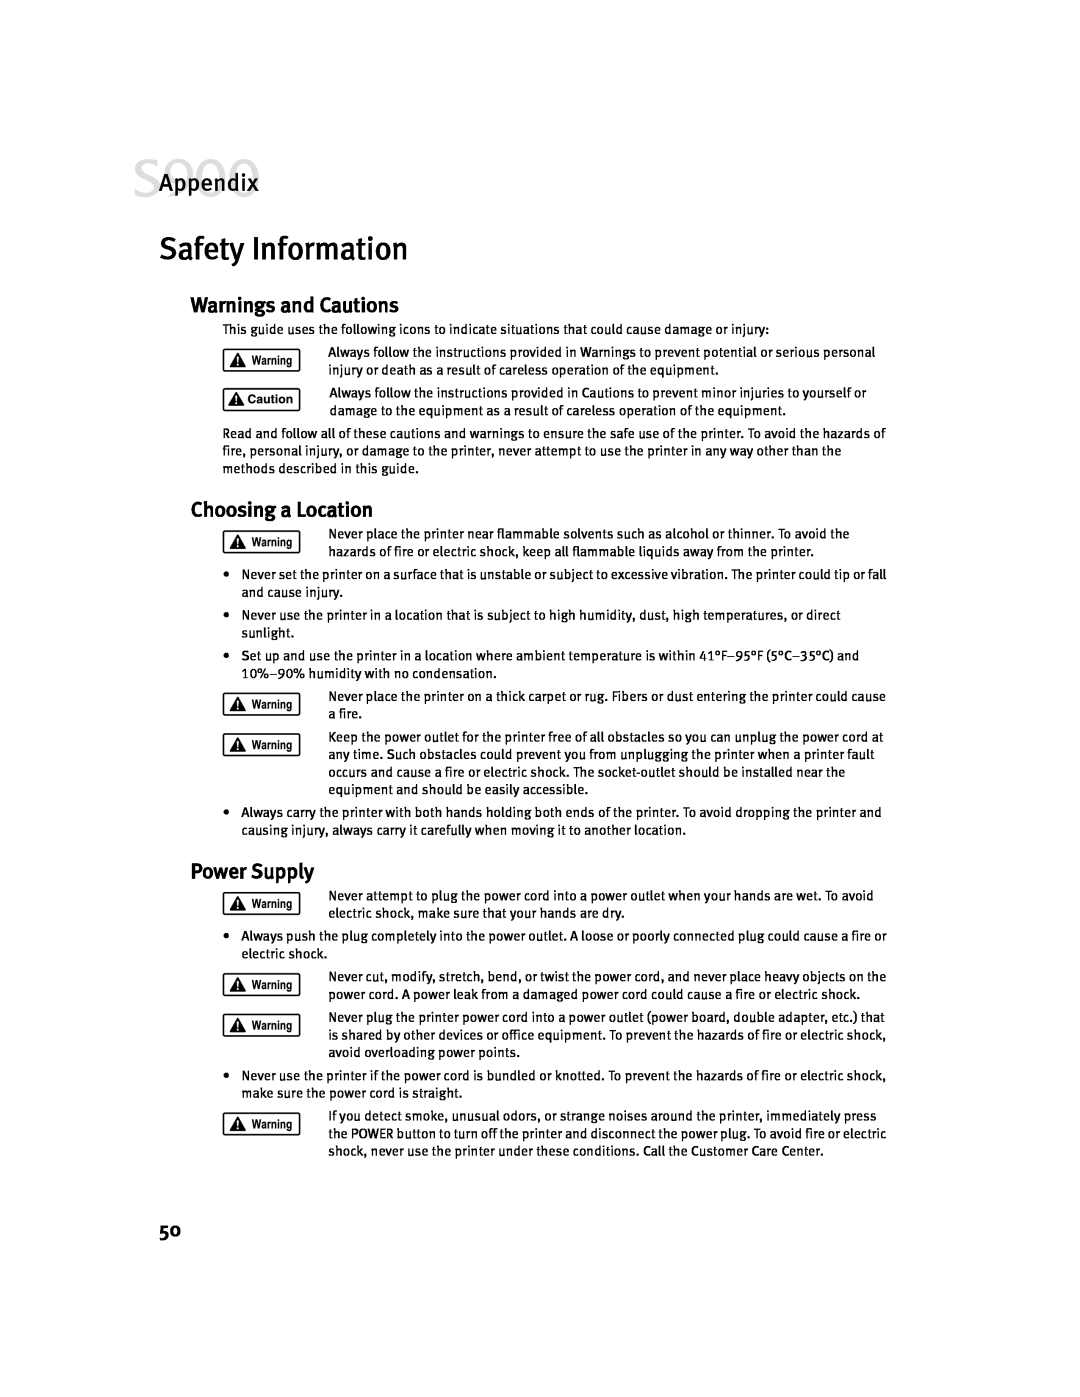 Canon S900 quick start Safety Information, Warnings and Cautions, Choosing a Location, Power Supply, Appendix 